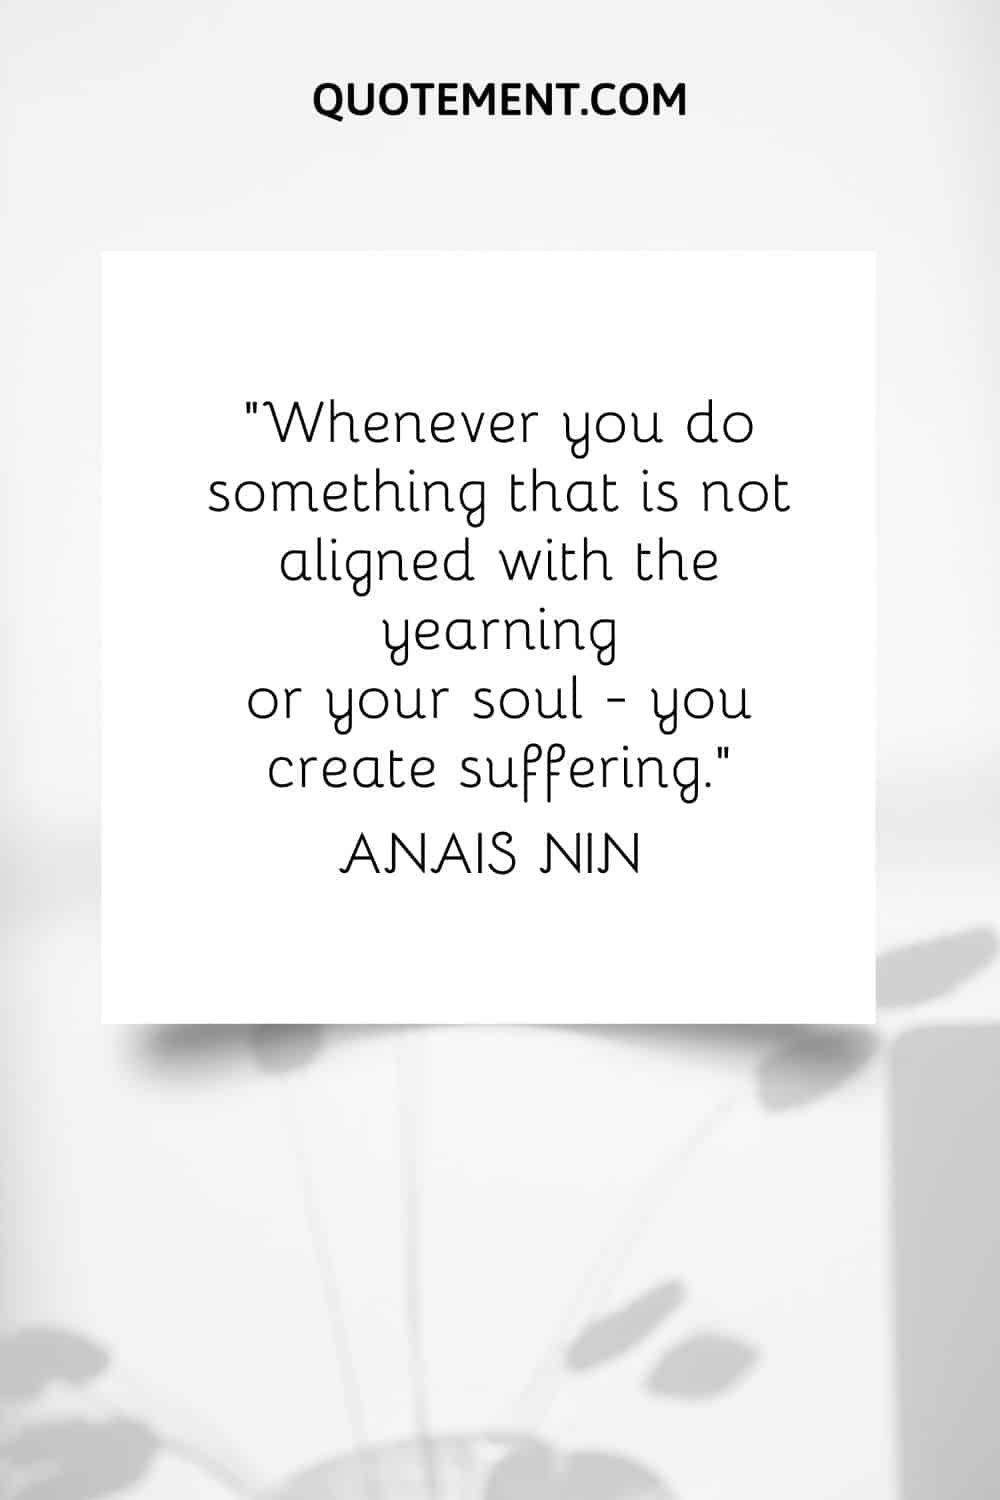 “Whenever you do something that is not aligned with the yearning or your soul - you create suffering.” — Anais Nin